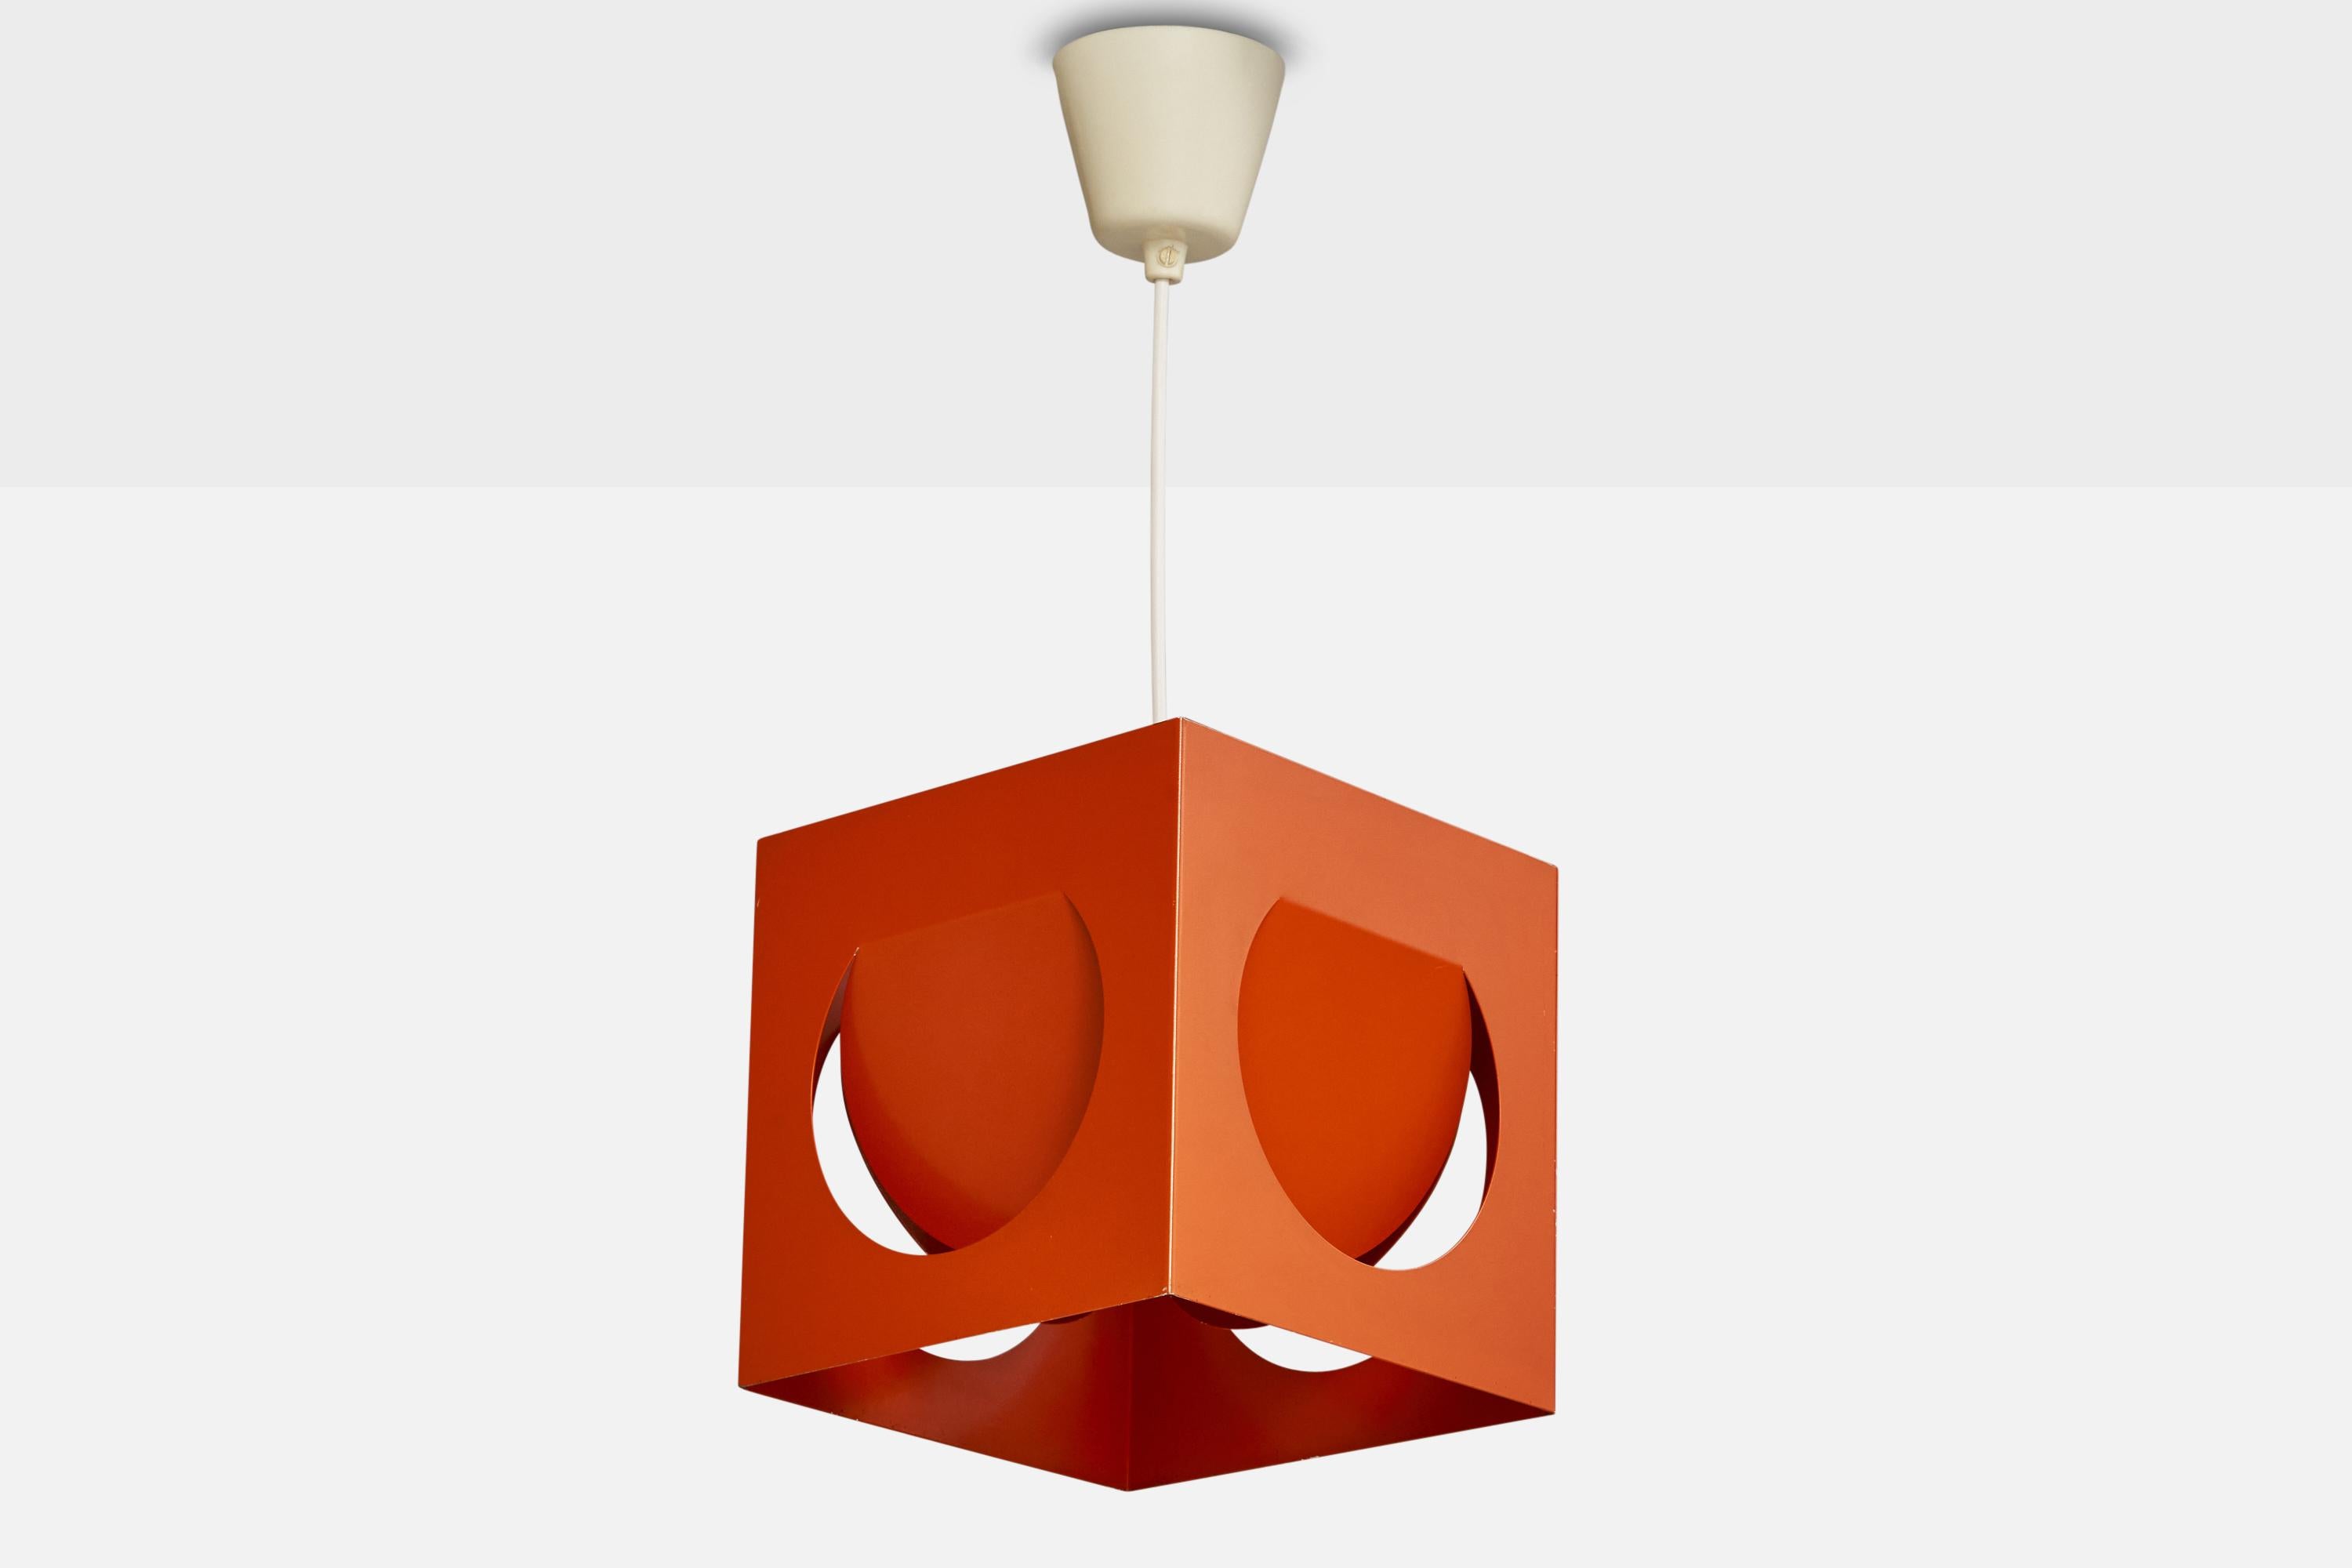 A red-lacquered metal pendant light designed and produced in Sweden, 1970s.

Dimensions of canopy (inches): 2.75” H x 3.5”  Diameter
Socket takes standard E-26 bulbs. 1 socket.There is no maximum wattage stated on the fixture. All lighting will be